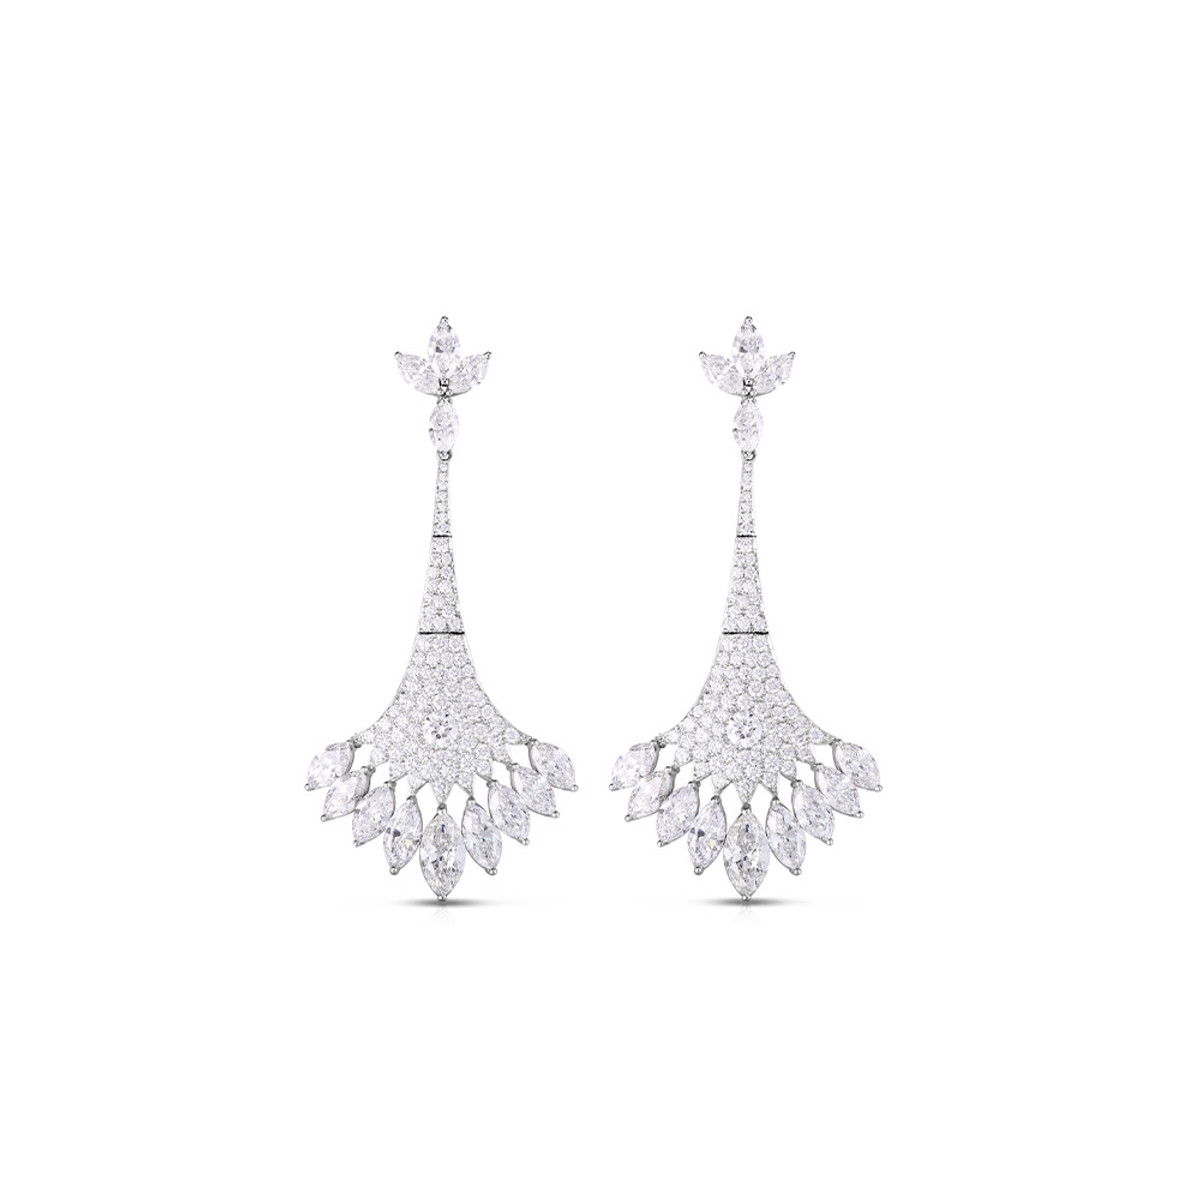 Hyde Park Collection Platinum Diamond Earrings Product Image